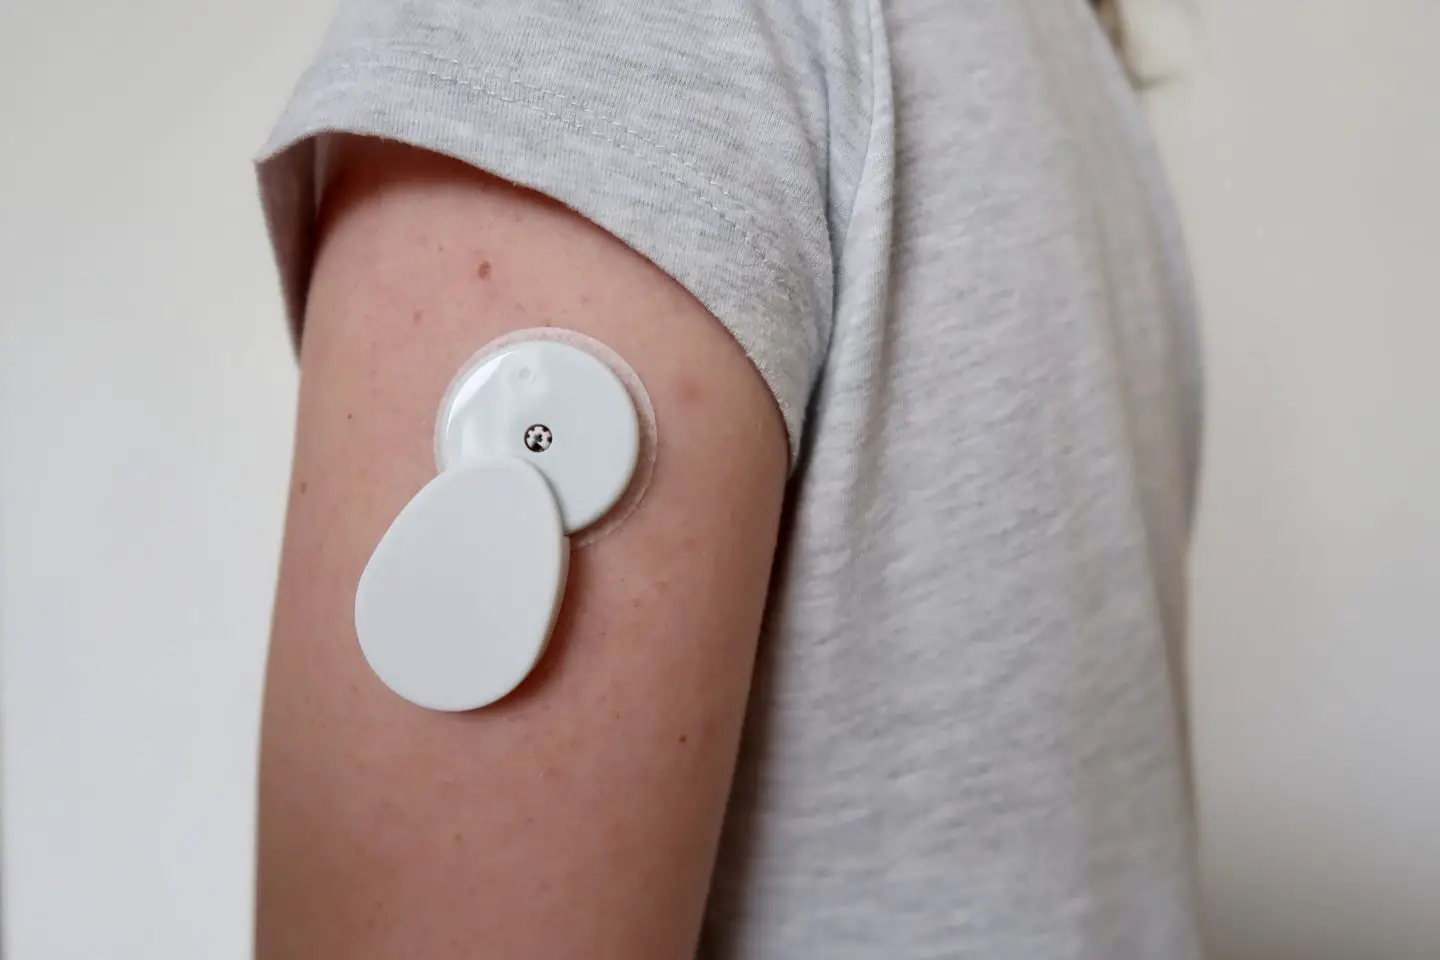 A close up of a round Freestyle Libre and Bubble CGM on a woman's arm